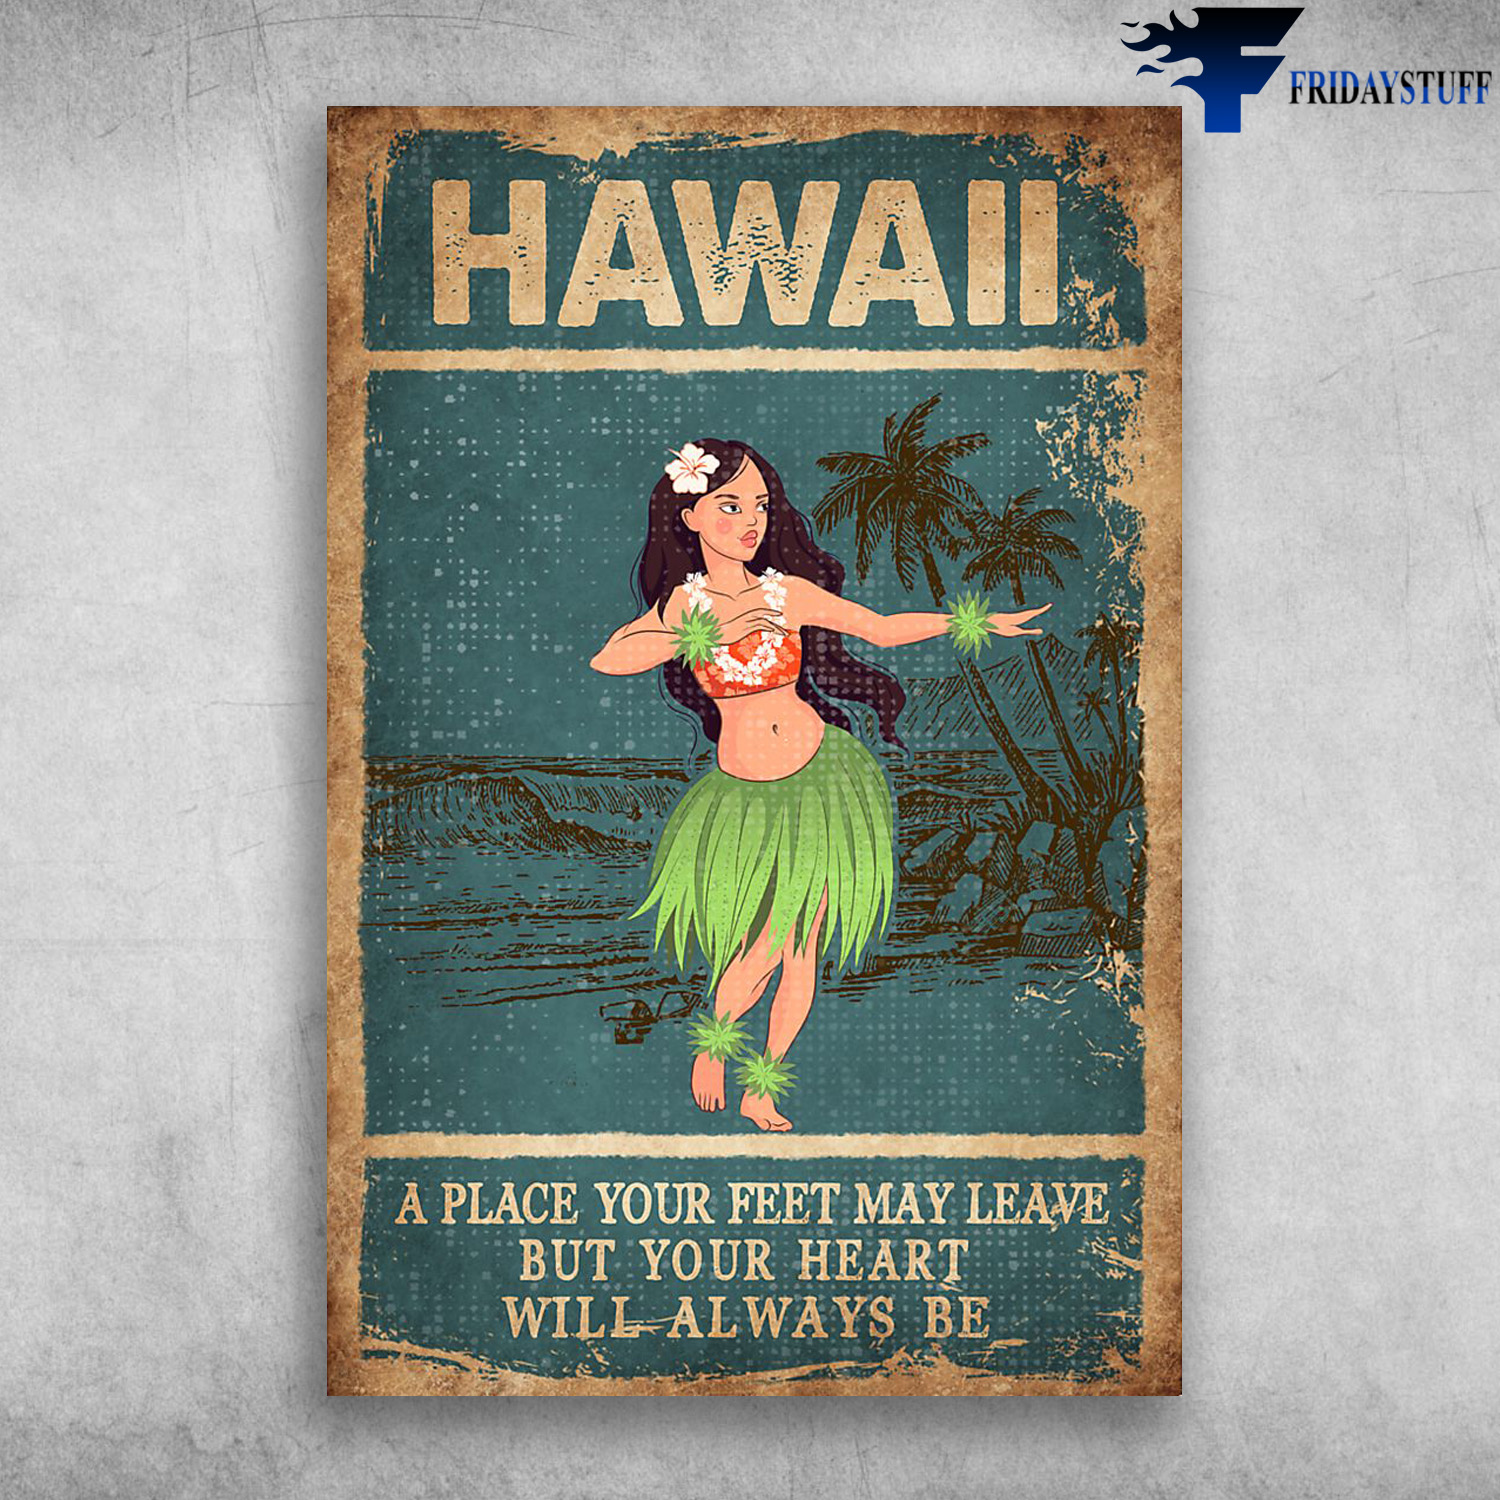 Dancing Girl In Hawaii - A Place Your Feet May Leave But Your Heart Will Always Be